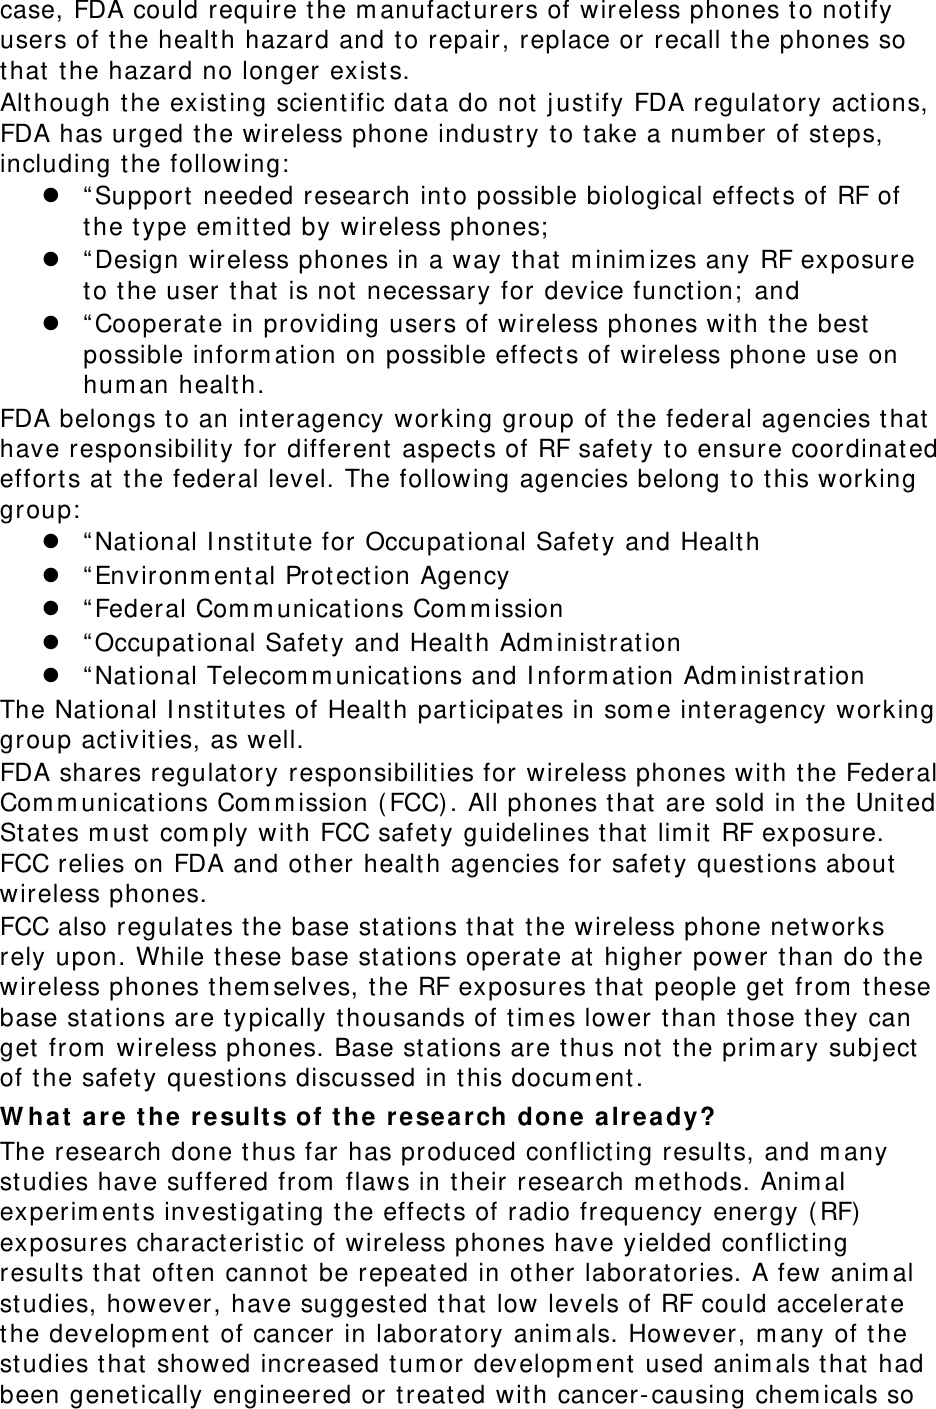 case, FDA could require t he m anufact urers of wireless phones t o notify users of t he health hazard and t o repair, replace or recall t he phones so that t he hazard no longer exists. Alt hough the existing scient ific data do not j ustify FDA regulat ory act ions, FDA has urged the wireless phone indust ry t o t ake a num ber of st eps, including t he following:  z “ Support  needed research into possible biological effect s of RF of the t ype em it t ed by wireless phones;  z “ Design wireless phones in a way t hat m inim izes any RF exposure to the user t hat is not necessary for device funct ion;  and z “ Cooperat e in providing users of wireless phones with the best  possible inform at ion on possible effect s of wireless phone use on hum an healt h. FDA belongs t o an int eragency working group of t he federal agencies t hat have responsibility for different  aspect s of RF safet y t o ensure coordinated efforts at t he federal level. The following agencies belong t o t his working group:  z “ National I nstitut e for Occupational Safet y and Health z “ Environm ent al Protect ion Agency z “ Federal Com m unications Com m ission z “ Occupat ional Safet y and Health Adm inist ration z “ National Telecom m unicat ions and I nform ation Adm inist ration The Nat ional I nst itutes of Health part icipates in som e int eragency working group act ivities, as well. FDA shares regulat ory responsibilities for wireless phones with t he Federal Com m unicat ions Com m ission ( FCC). All phones t hat are sold in the United St at es m ust com ply with FCC safet y guidelines t hat lim it  RF exposure. FCC relies on FDA and other health agencies for safet y quest ions about  wireless phones. FCC also regulat es the base st at ions t hat t he wireless phone networks rely upon. While these base st at ions operate at  higher power than do the wireless phones t hem selves, t he RF exposures t hat people get from  these base st at ions are t ypically thousands of t im es lower t han t hose they can get  from  wireless phones. Base st at ions are thus not t he prim ary subj ect  of the safet y quest ions discussed in t his docum ent . W ha t  are t h e  result s of t he rese a rch done alrea dy? The research done t hus far has produced conflict ing results, and m any studies have suffered from  flaws in t heir research m ethods. Anim al experim ent s invest igating t he effect s of radio frequency energy ( RF) exposures charact eristic of wireless phones have yielded conflict ing results that  often cannot be repeat ed in other laboratories. A few anim al studies, however, have suggest ed t hat low levels of RF could accelerate the developm ent  of cancer in laborat ory anim als. However, m any of the studies t hat showed increased t um or developm ent  used anim als that  had been genet ically engineered or t reated wit h cancer- causing chem icals so 